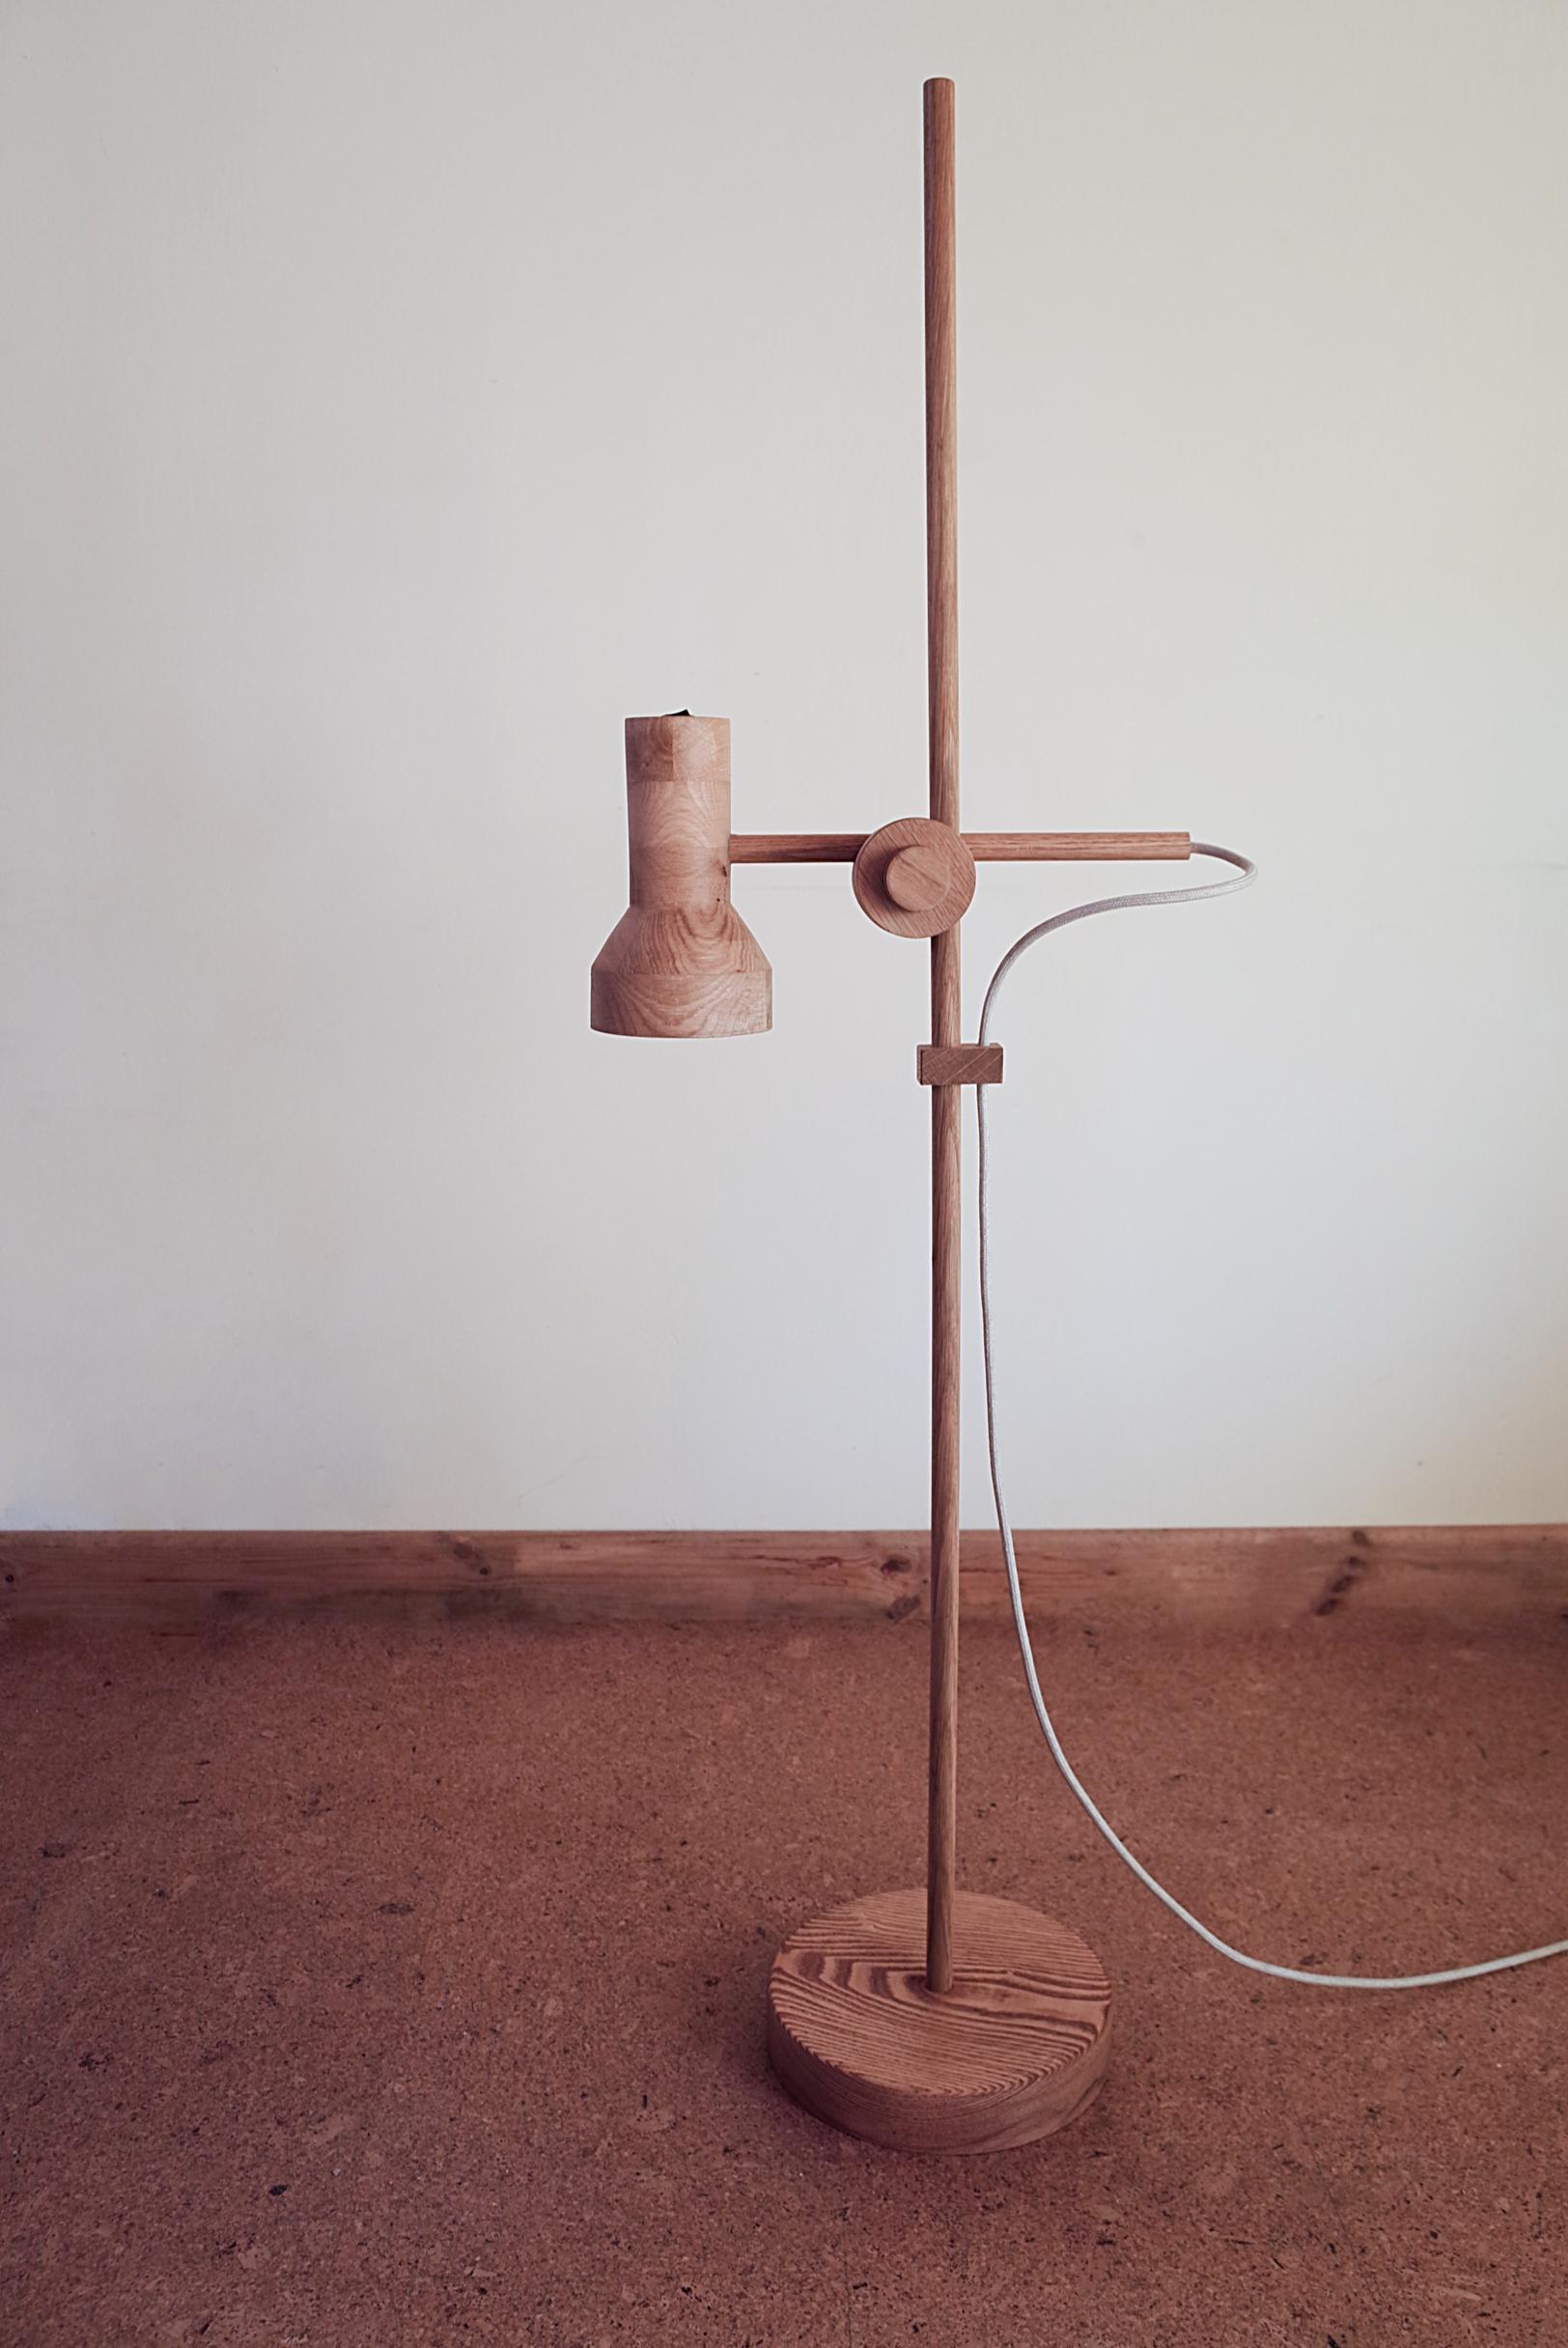 The Tannin Floor lamp was born from experiments dissecting and replicating vintage lamps, resulting in a perfect pairing of maturity and contemporary design. The lamp is made from sustainable woods that are naturally warm in tone, whilst the base is